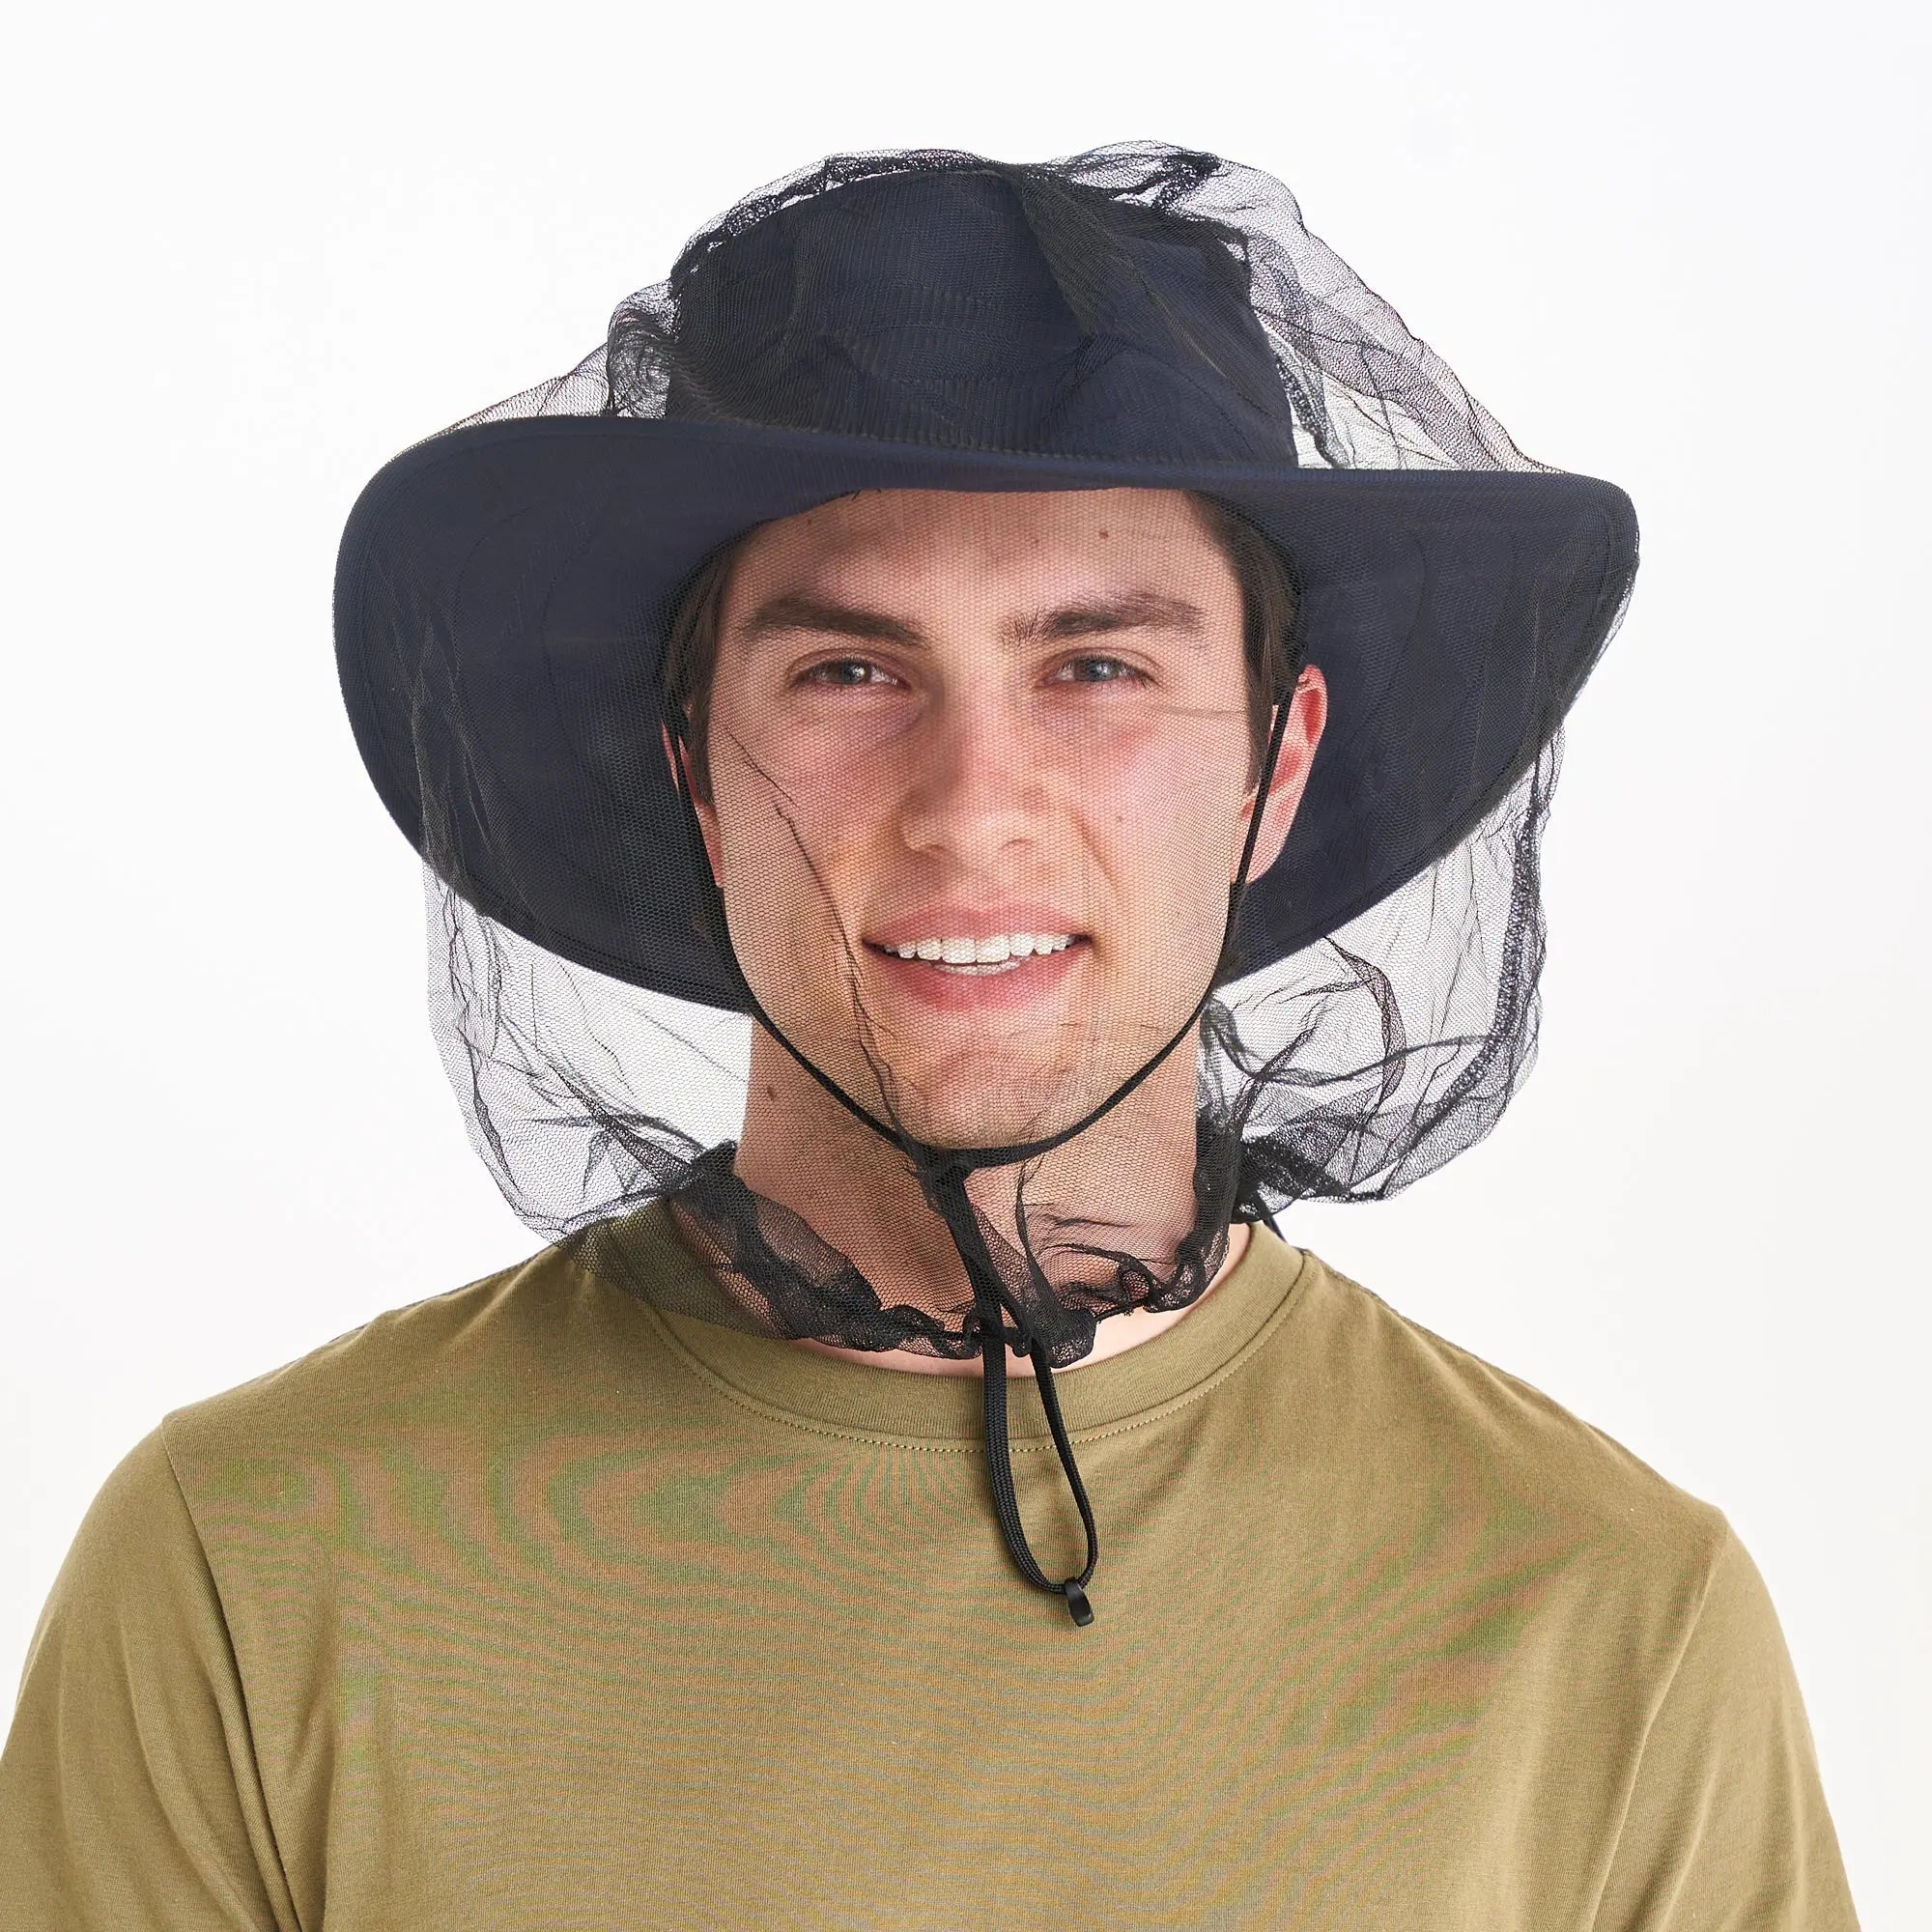 Coghlan's Compact Mosquito Head Net Lightweight w/ Storage Pouch, Mesh 220 Holes Coghlan's